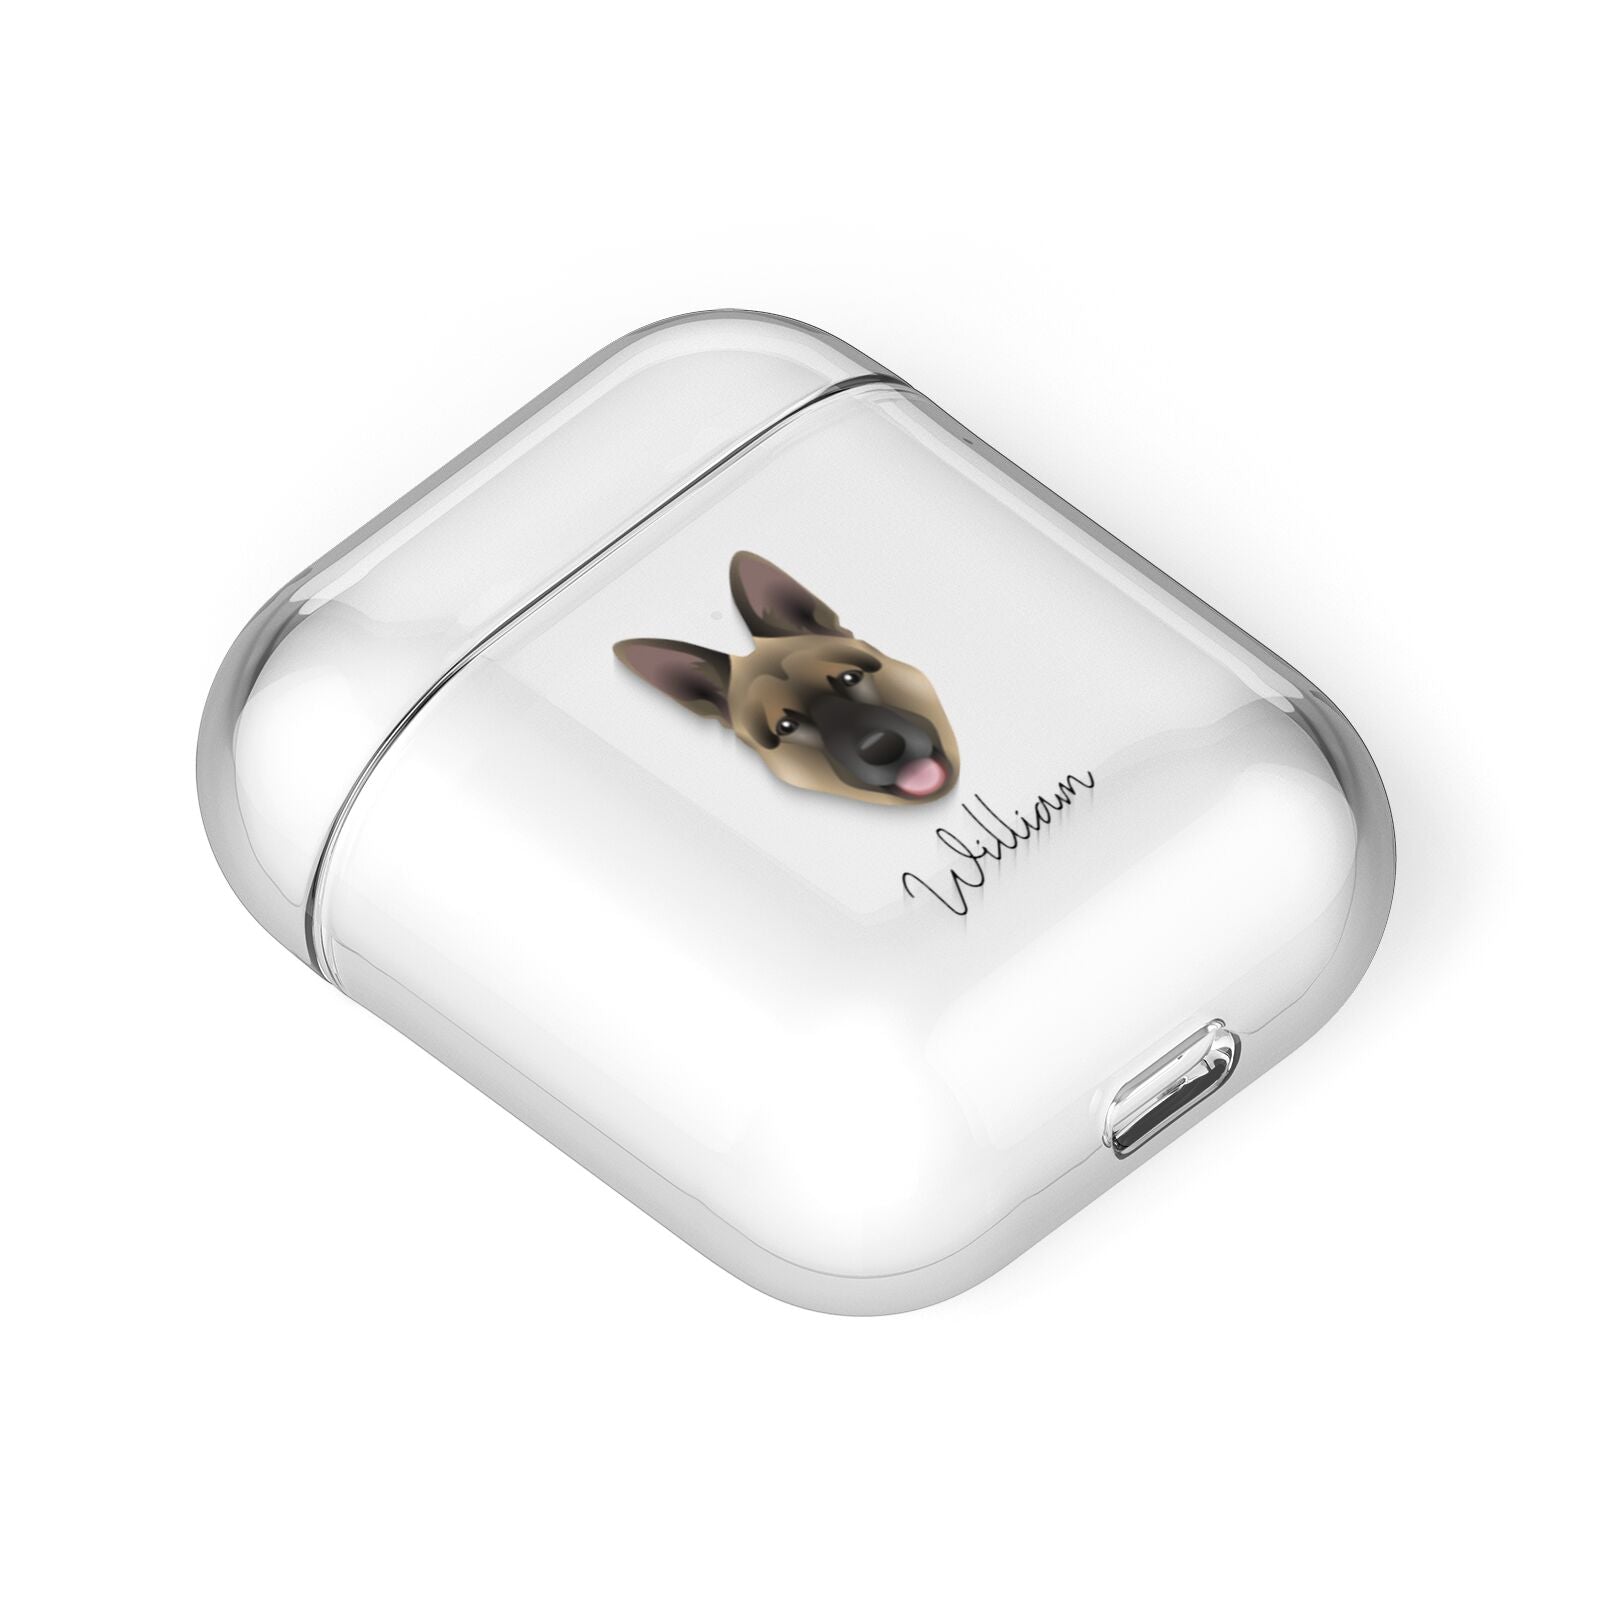 Belgian Malinois Personalised AirPods Case Laid Flat